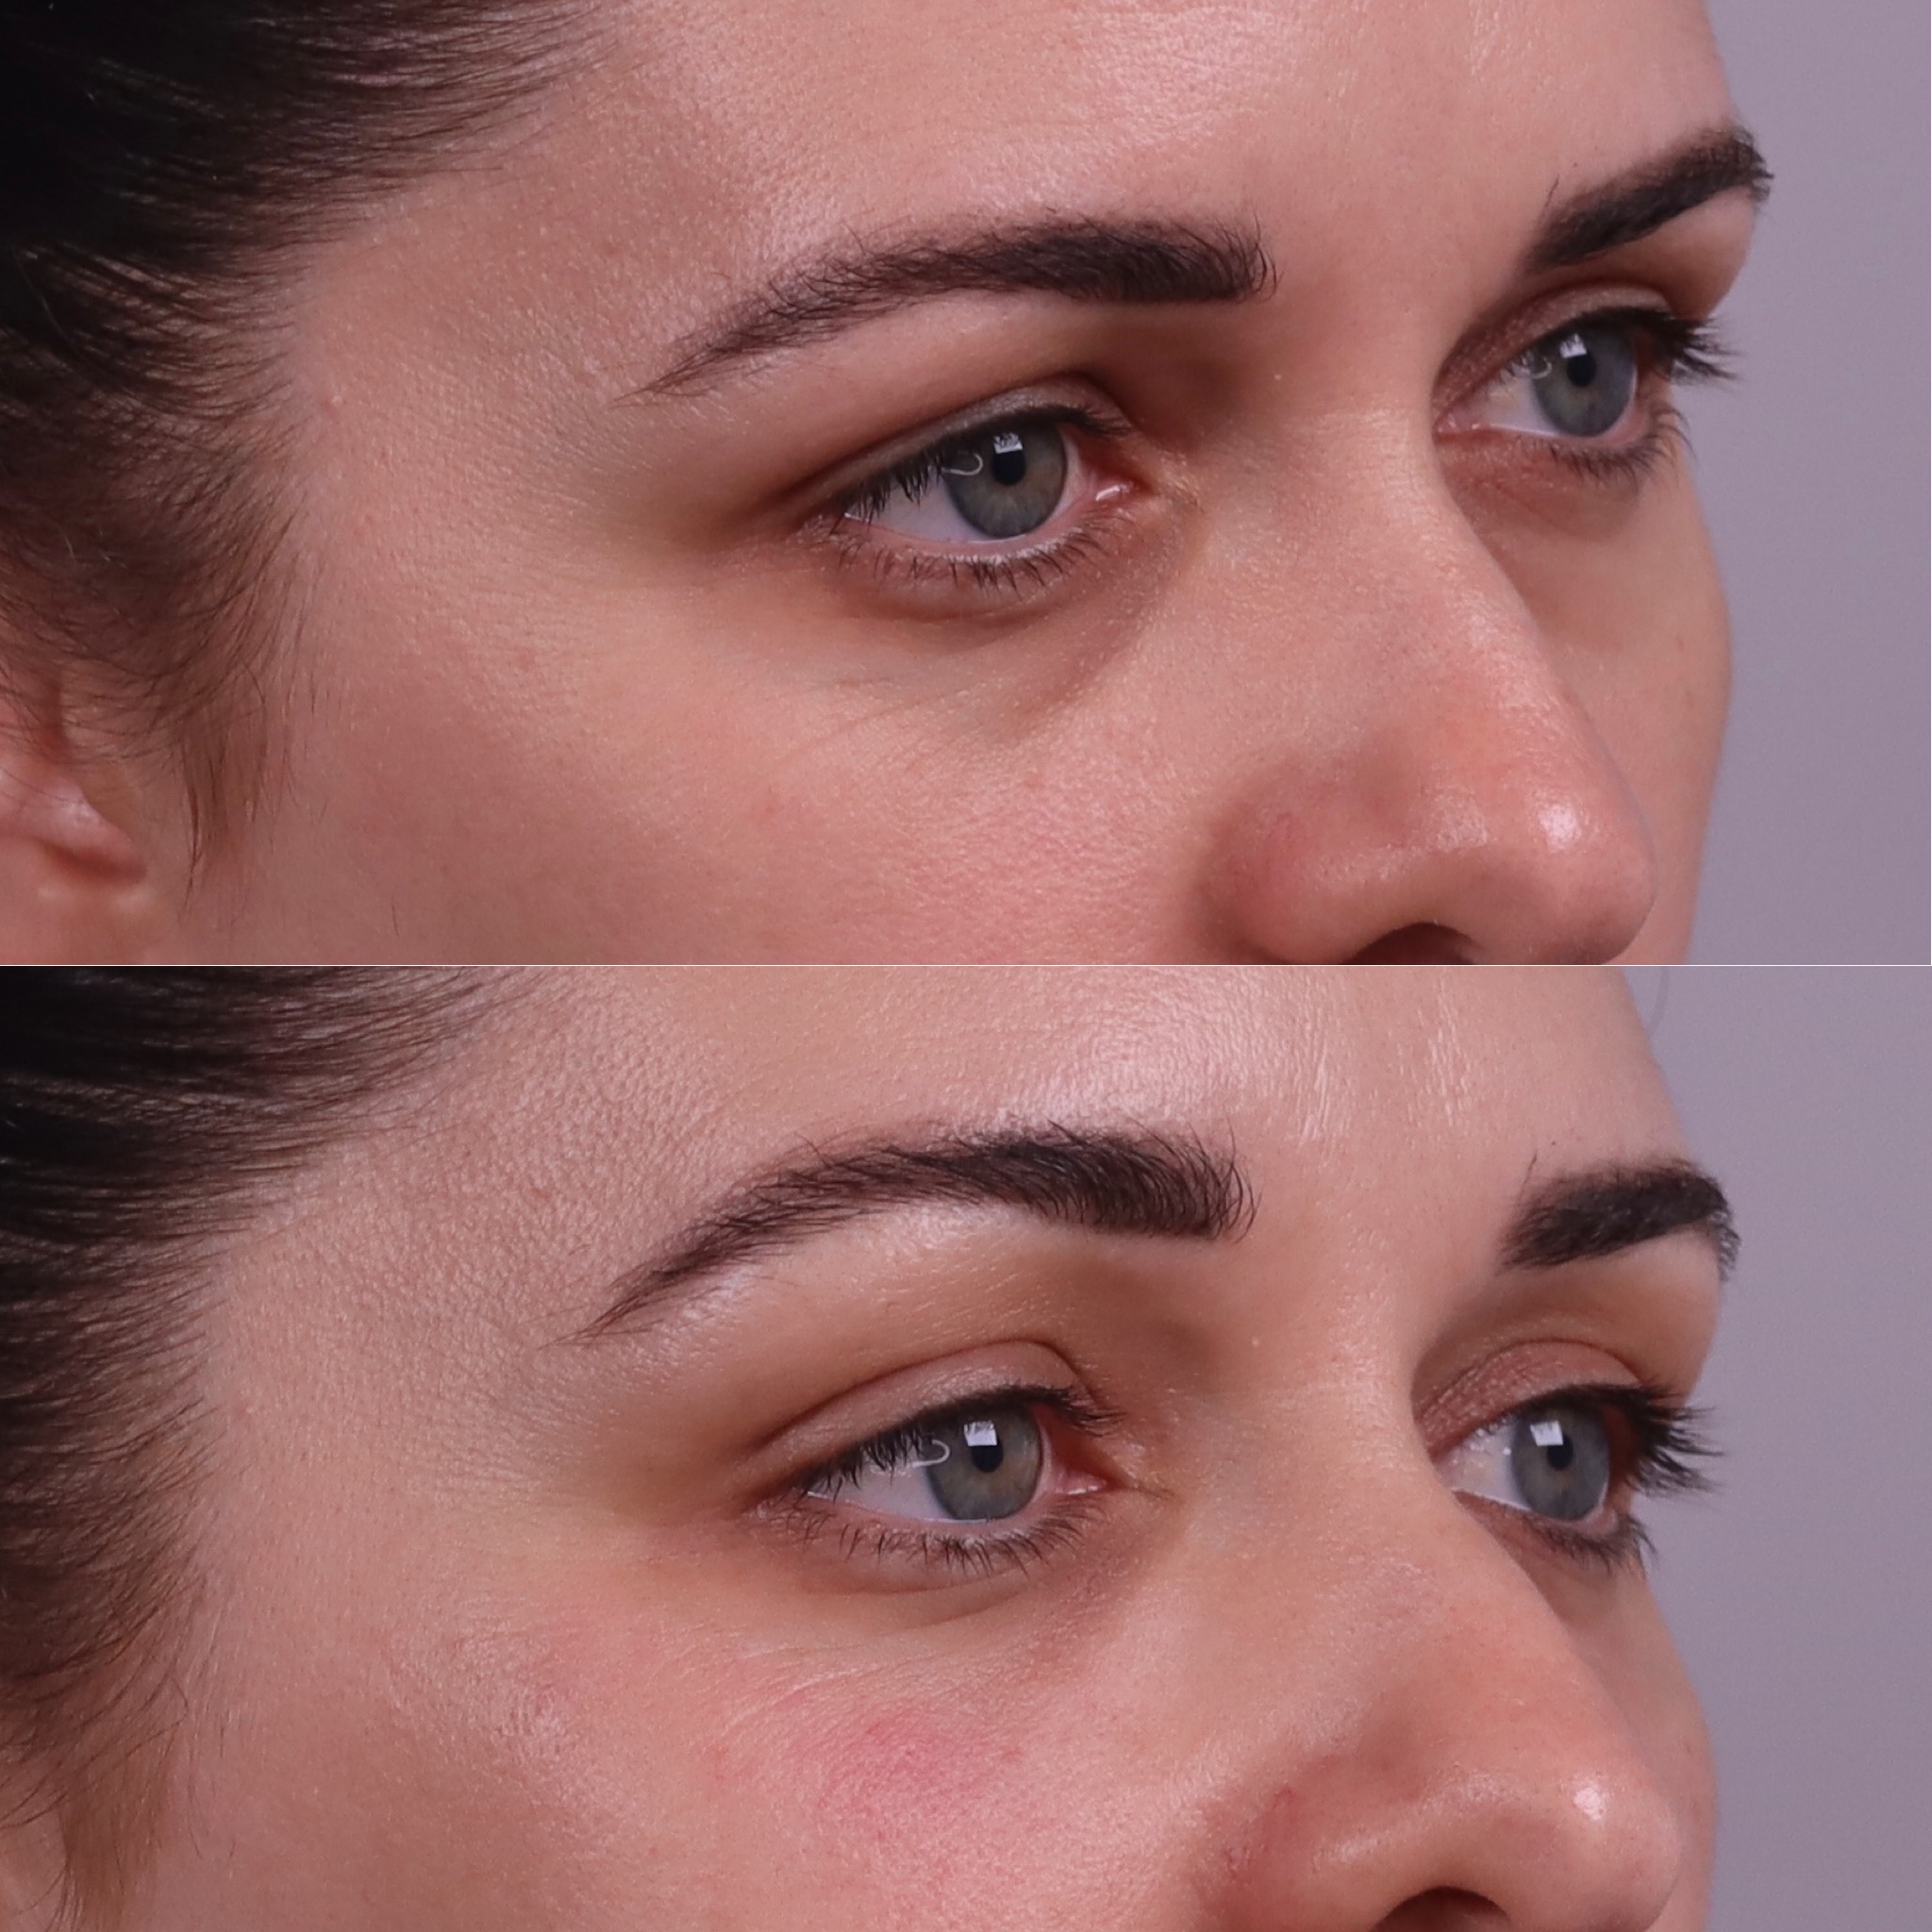 Before and after under eye filler photographs